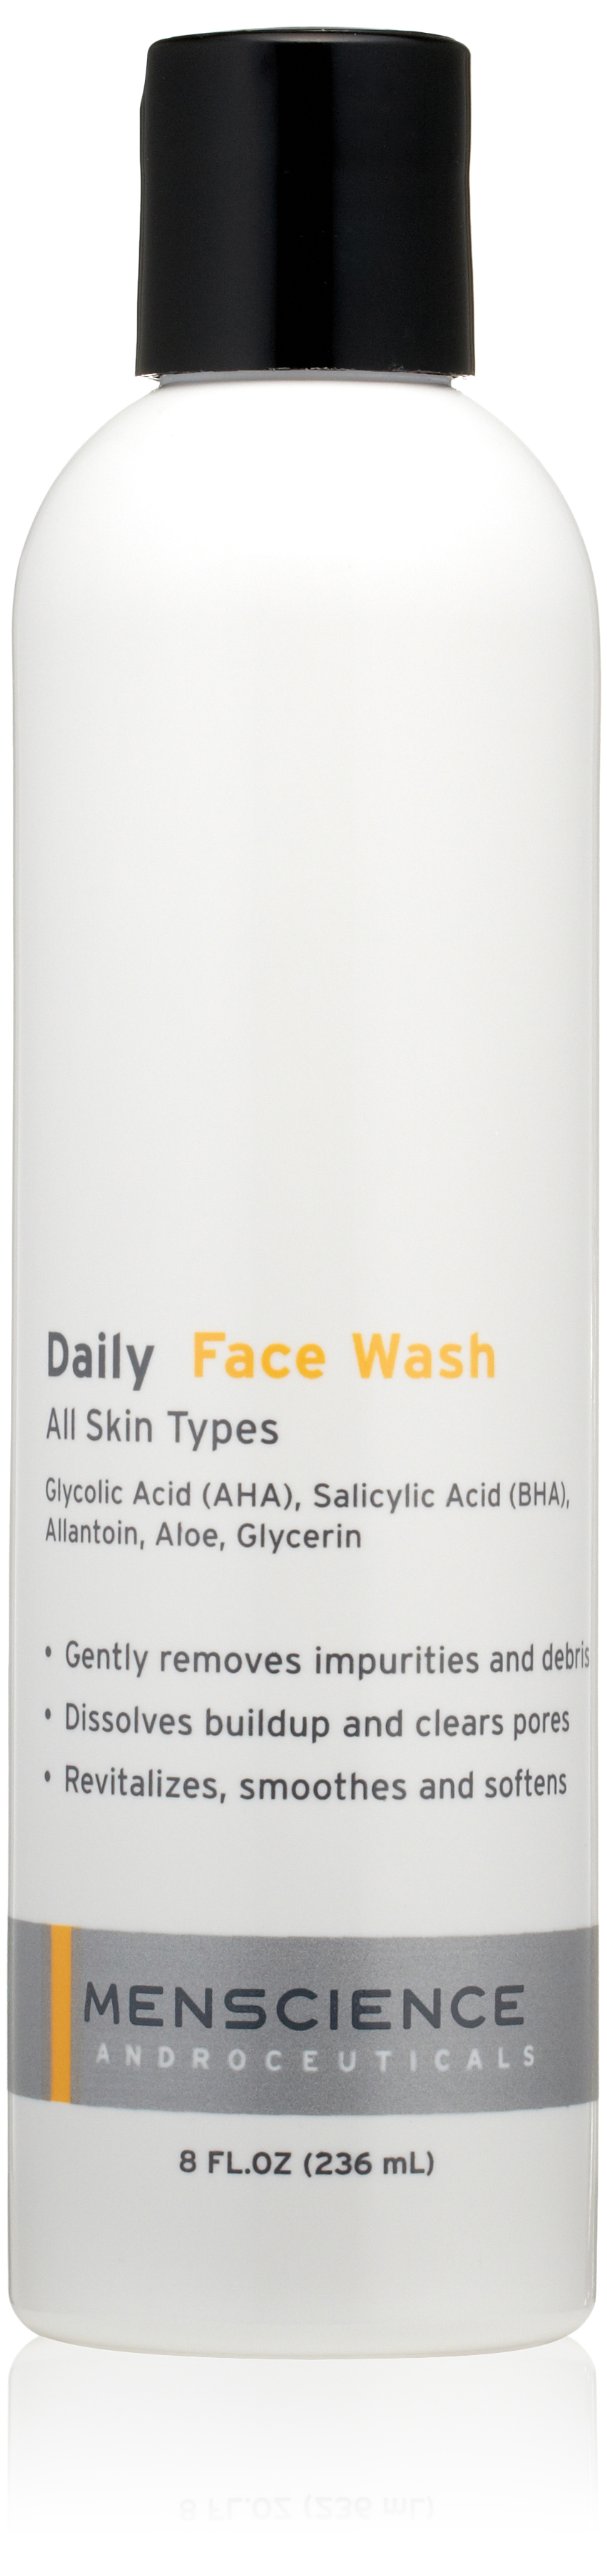 MenScience Androceuticals Daily Face Wash, 8 Fl Oz